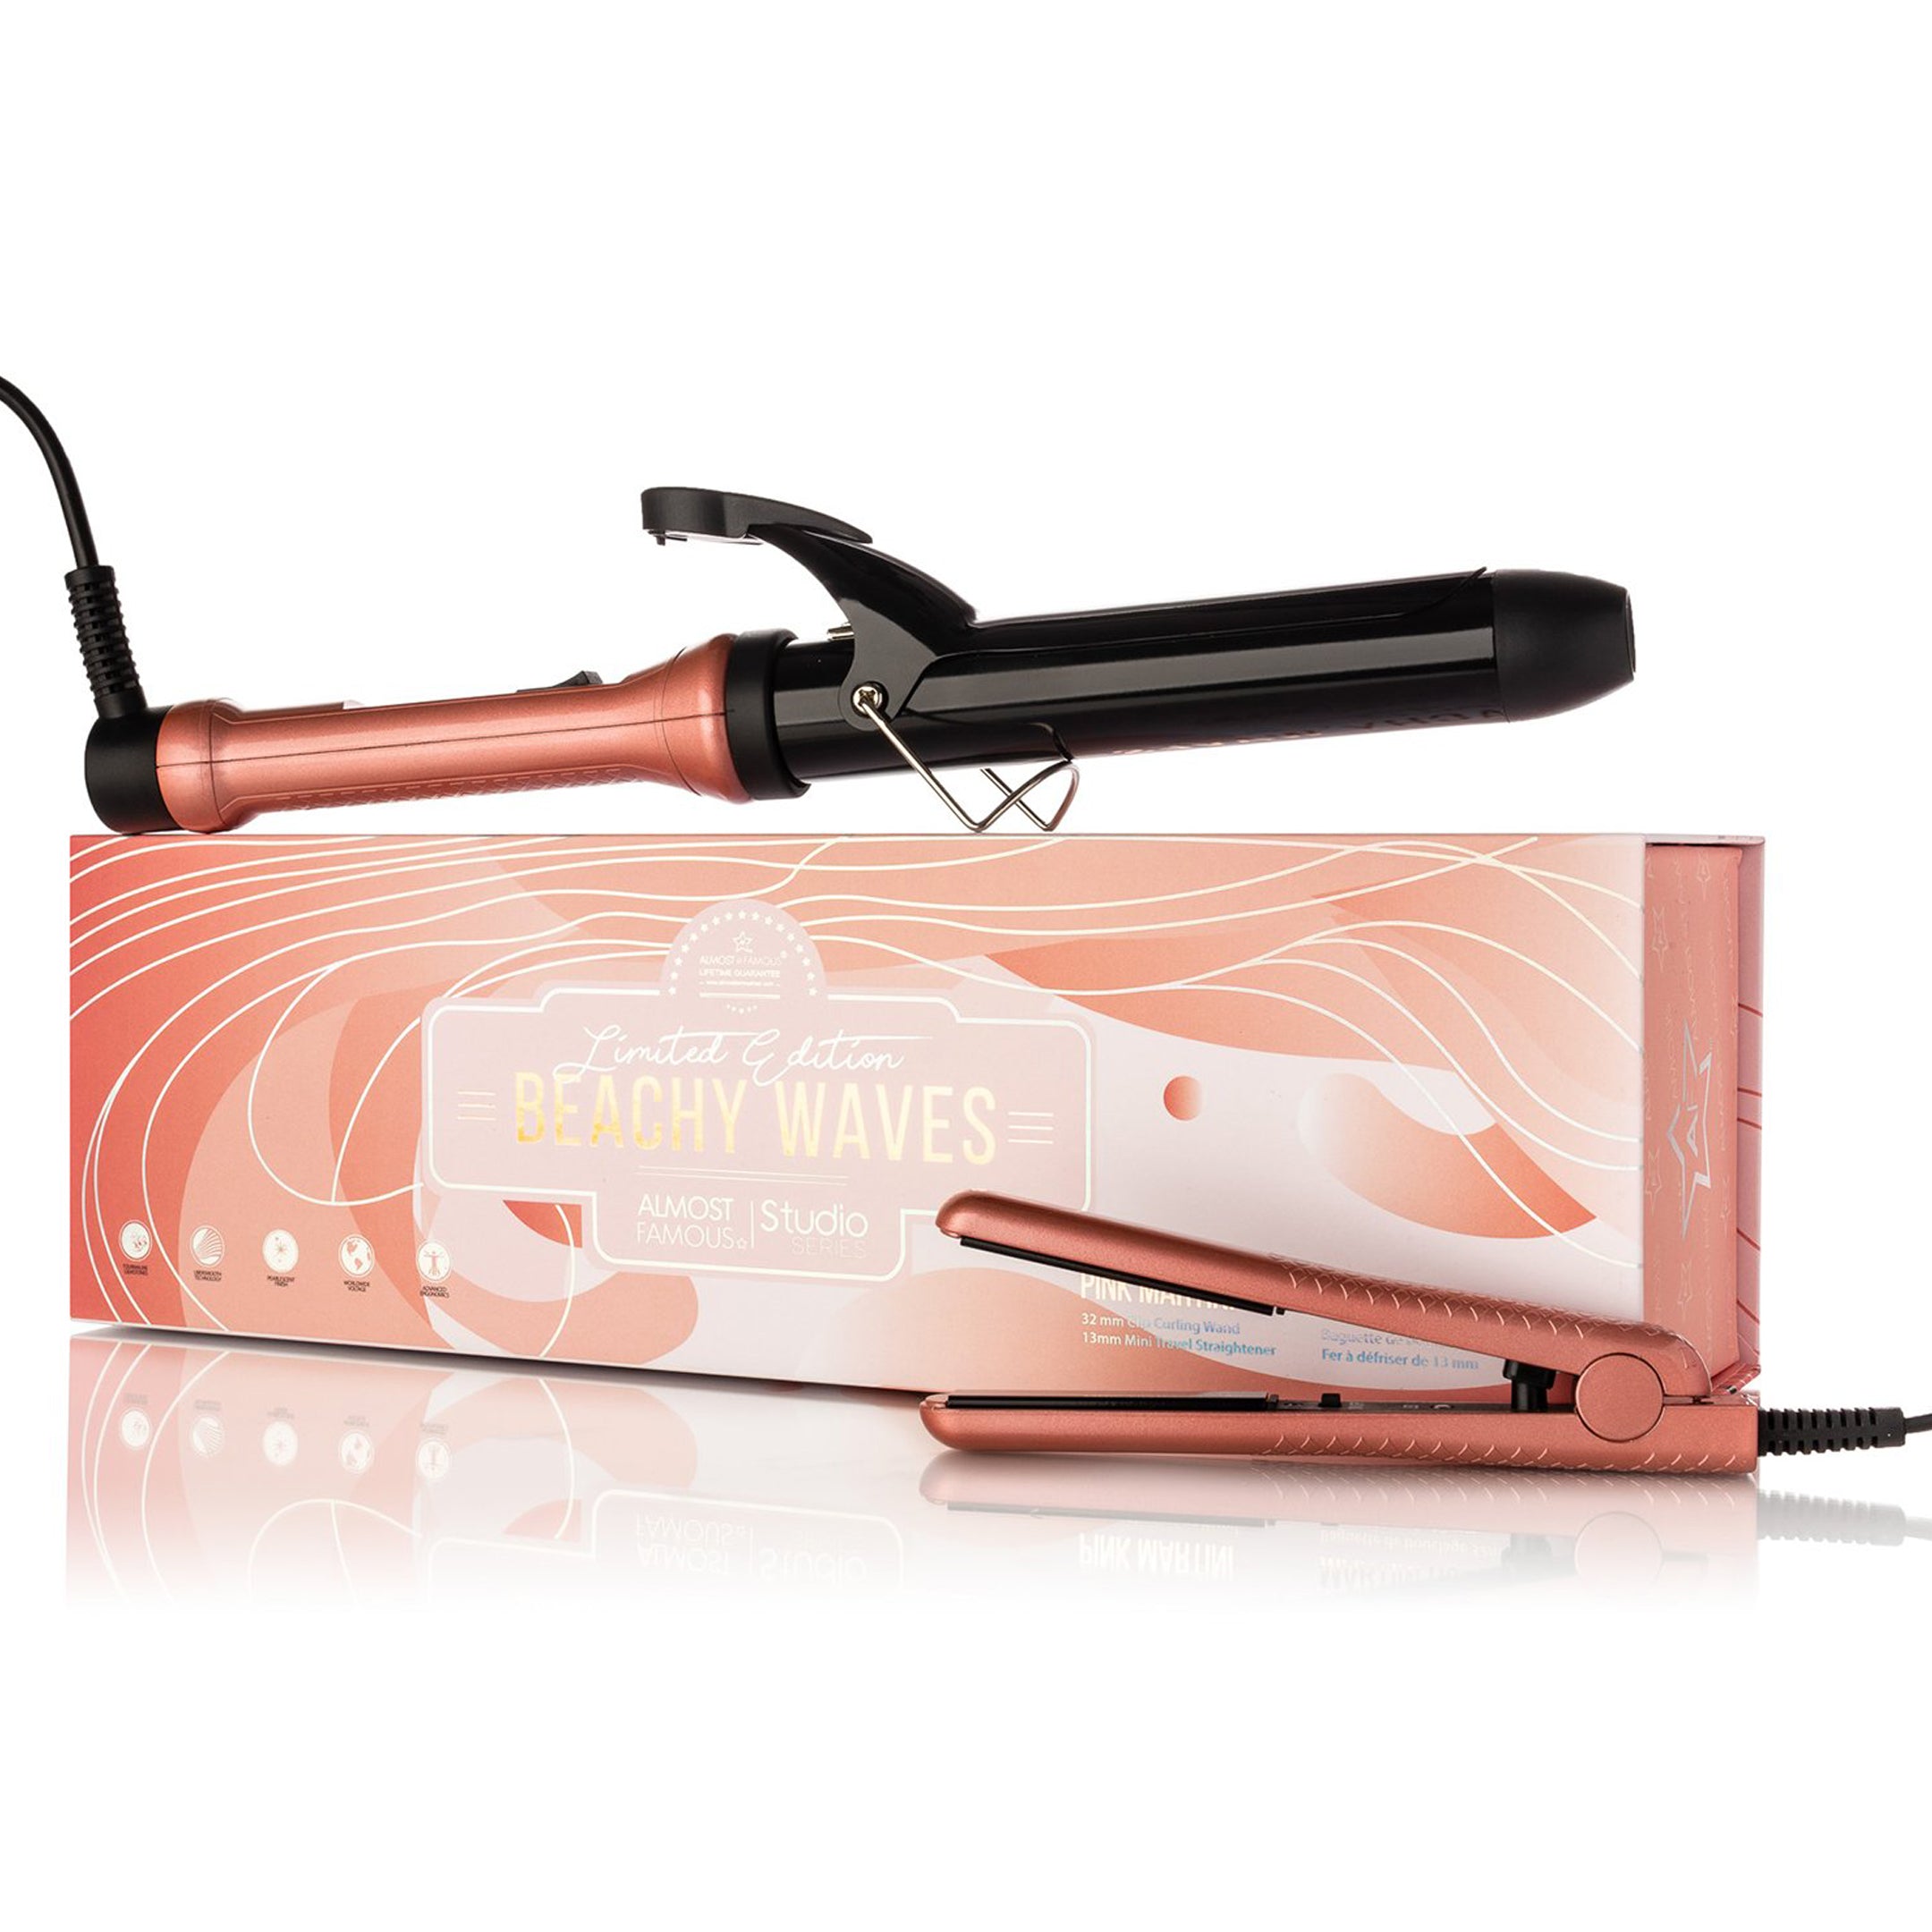 "Beach Wave Babe" 2-Piece Set with Curling Wand & Mini ToGo